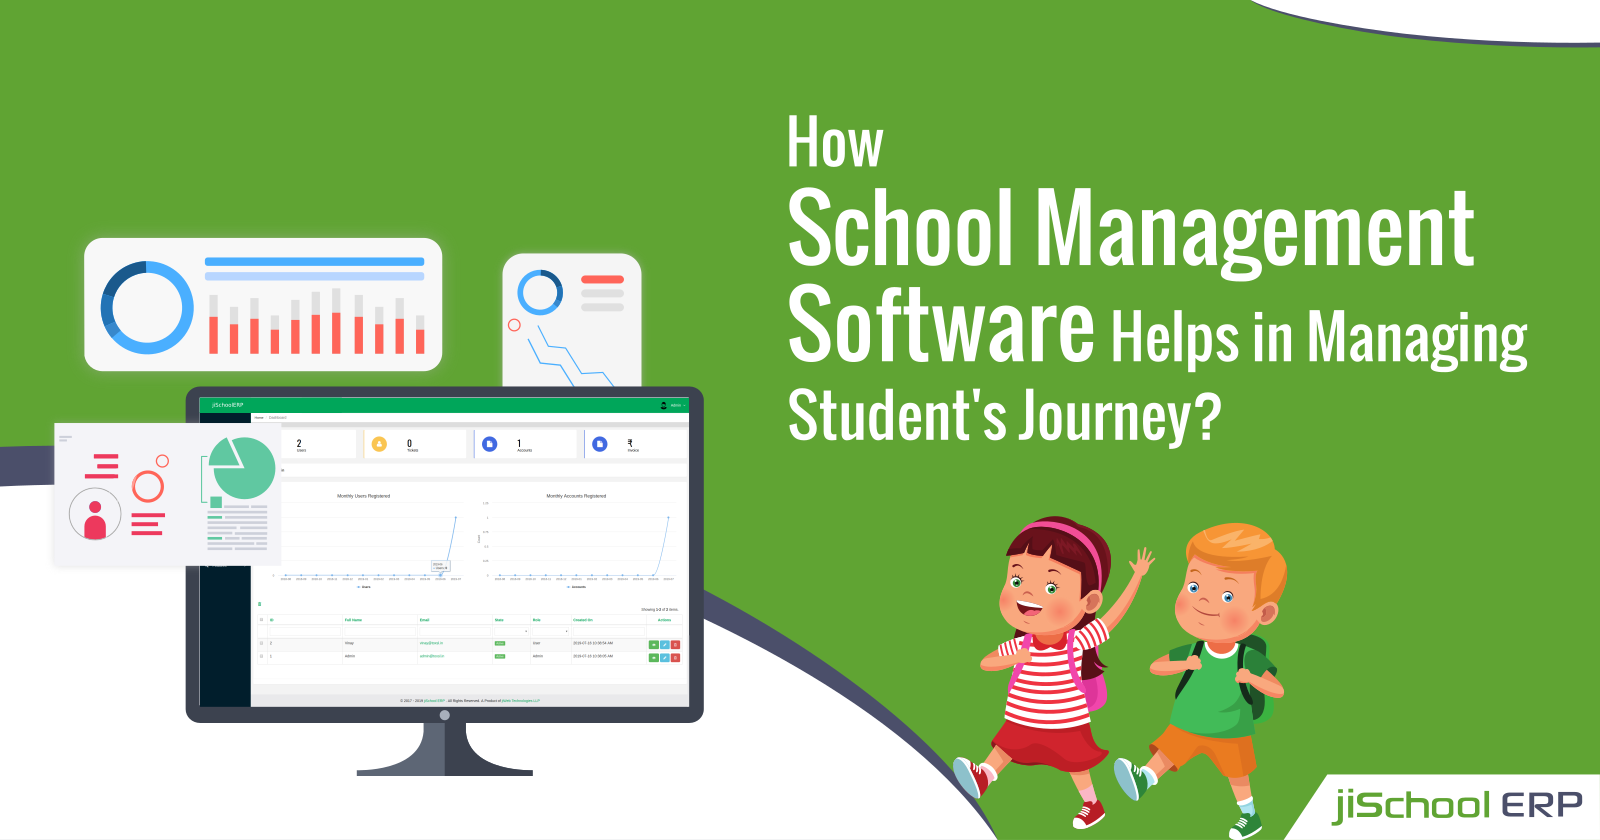 How School Management Software Helps in Managing Student's Journey?